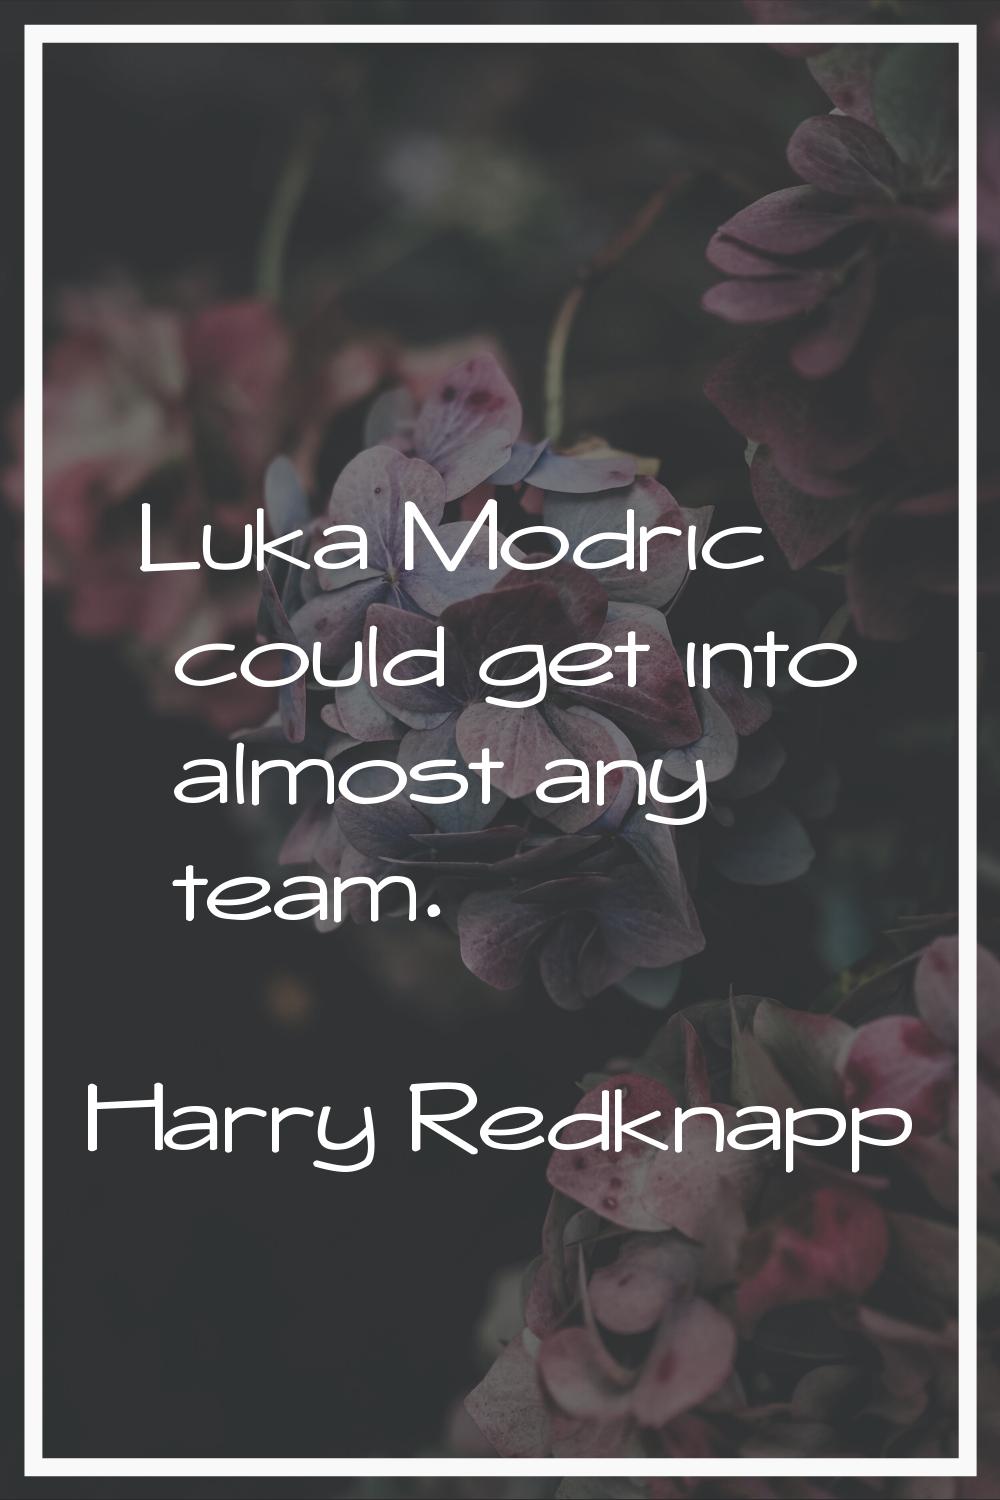 Luka Modric could get into almost any team.